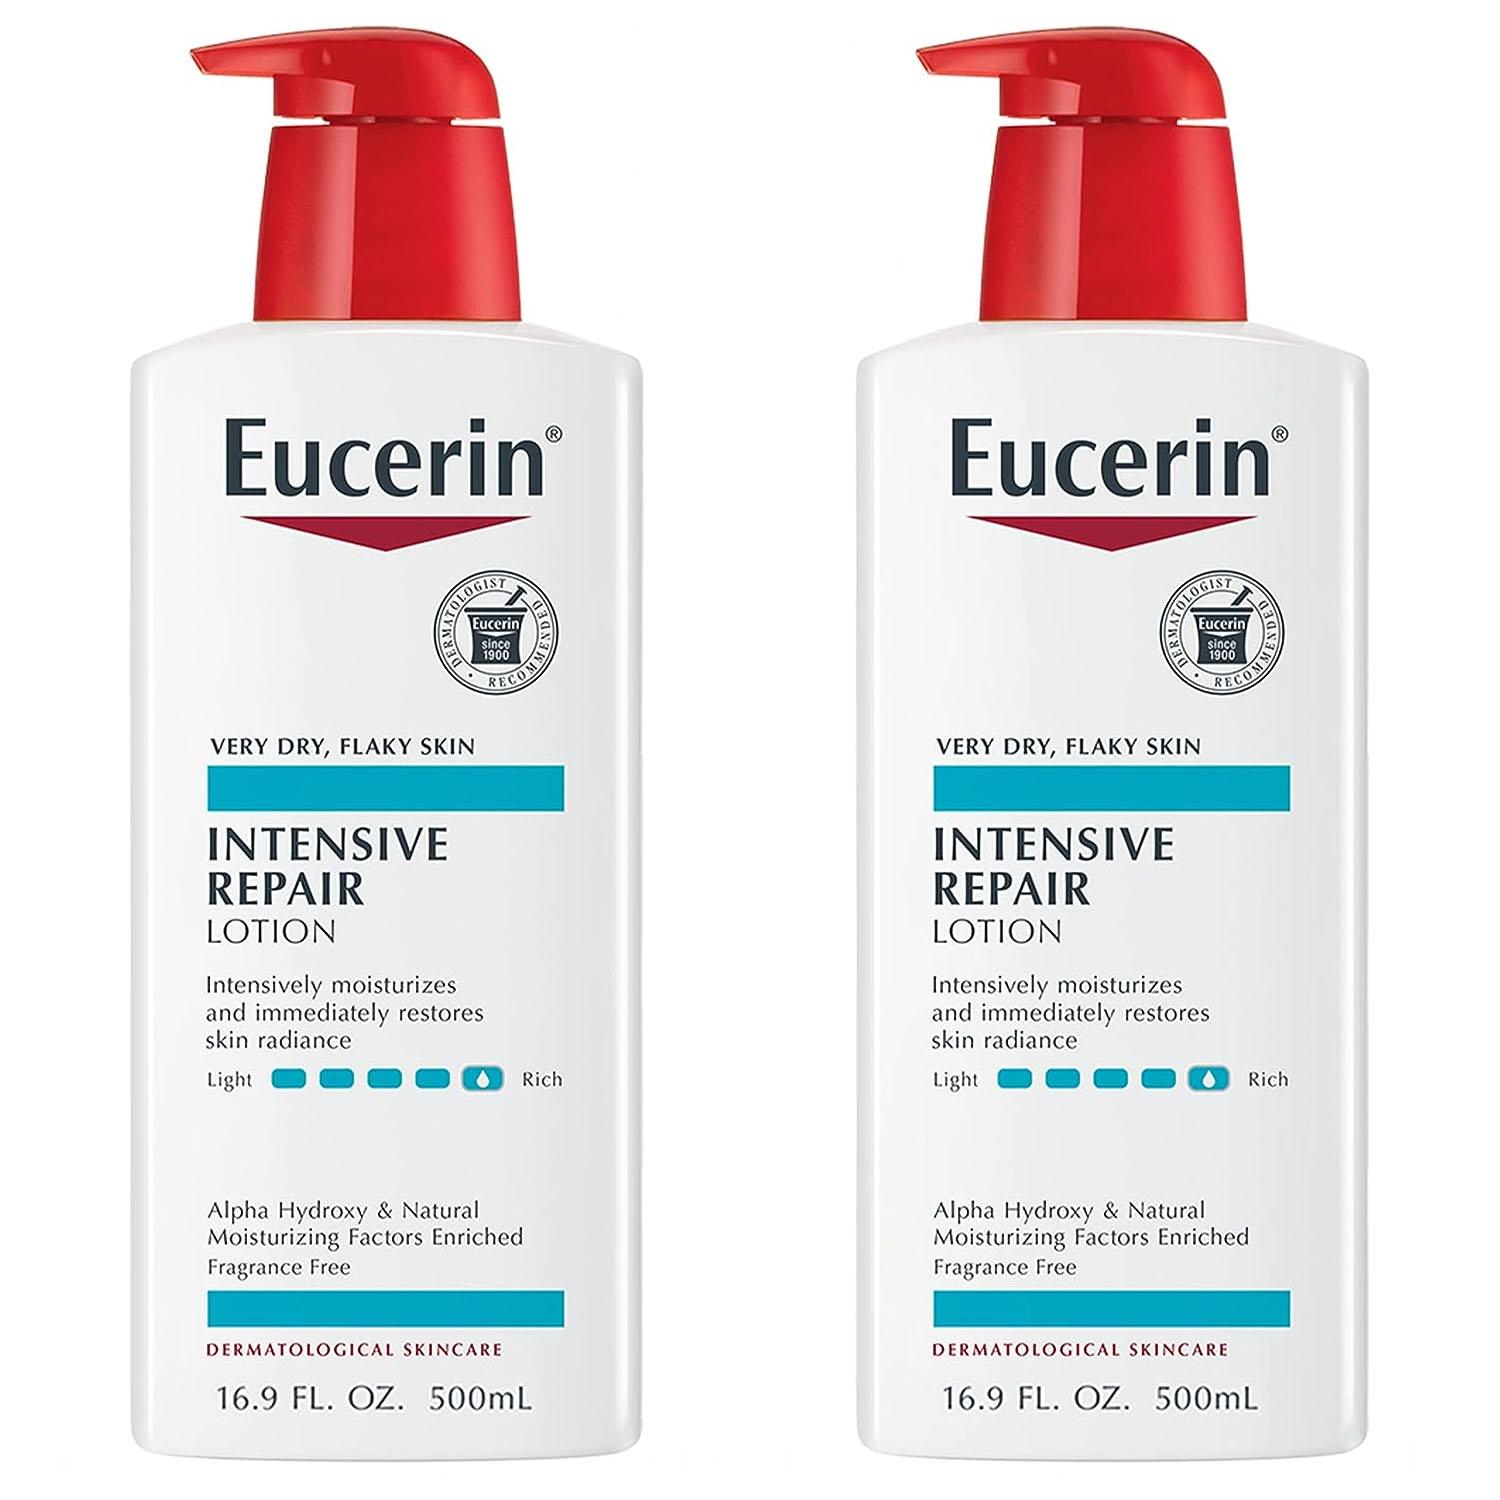 Eucerin Intensive Repair Body Lotion 2 Pack for $10.01 Shipped